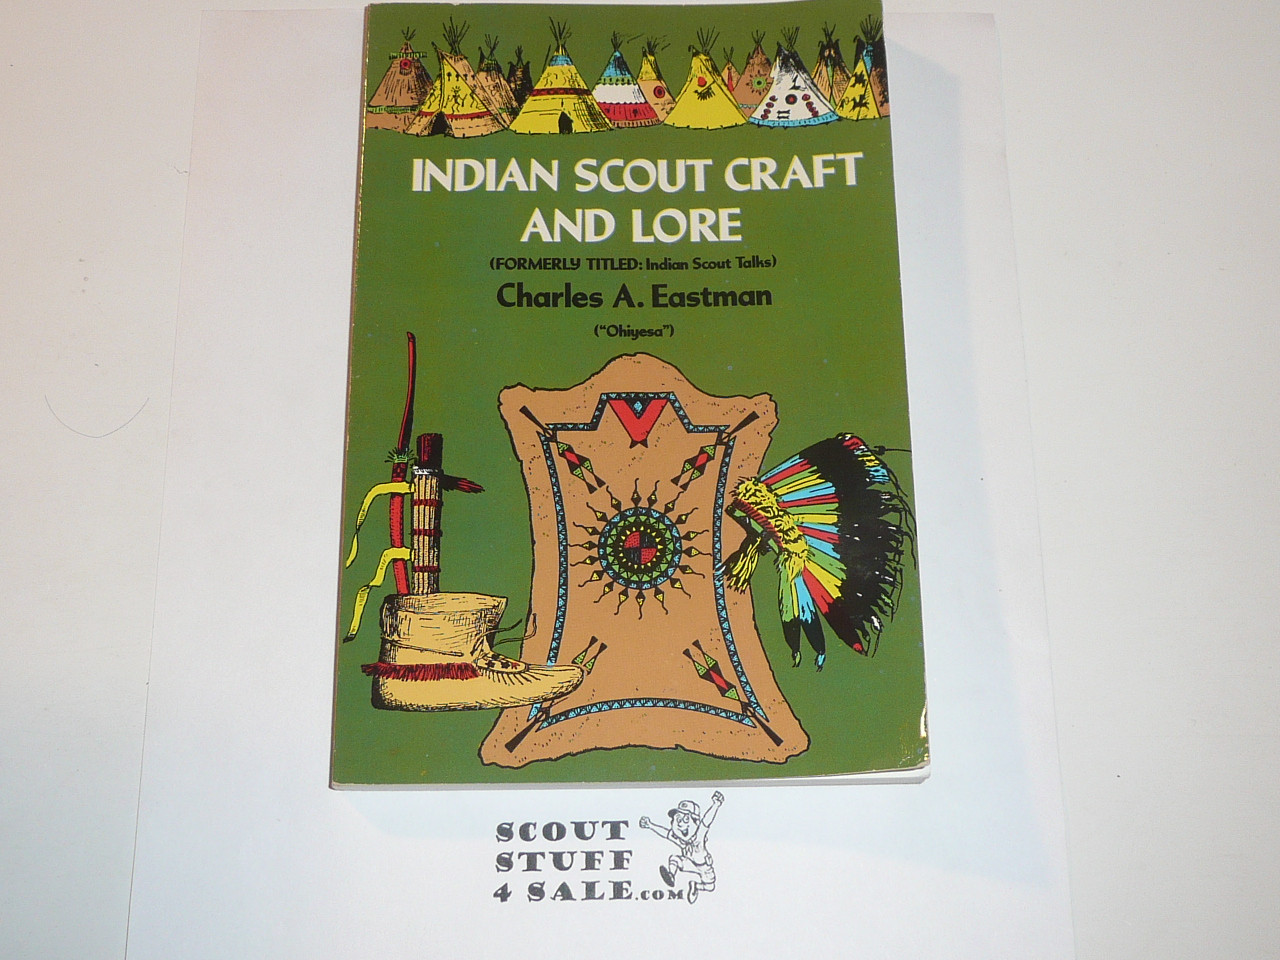 Indian Scout Craft and Lore, by Charles Eastman